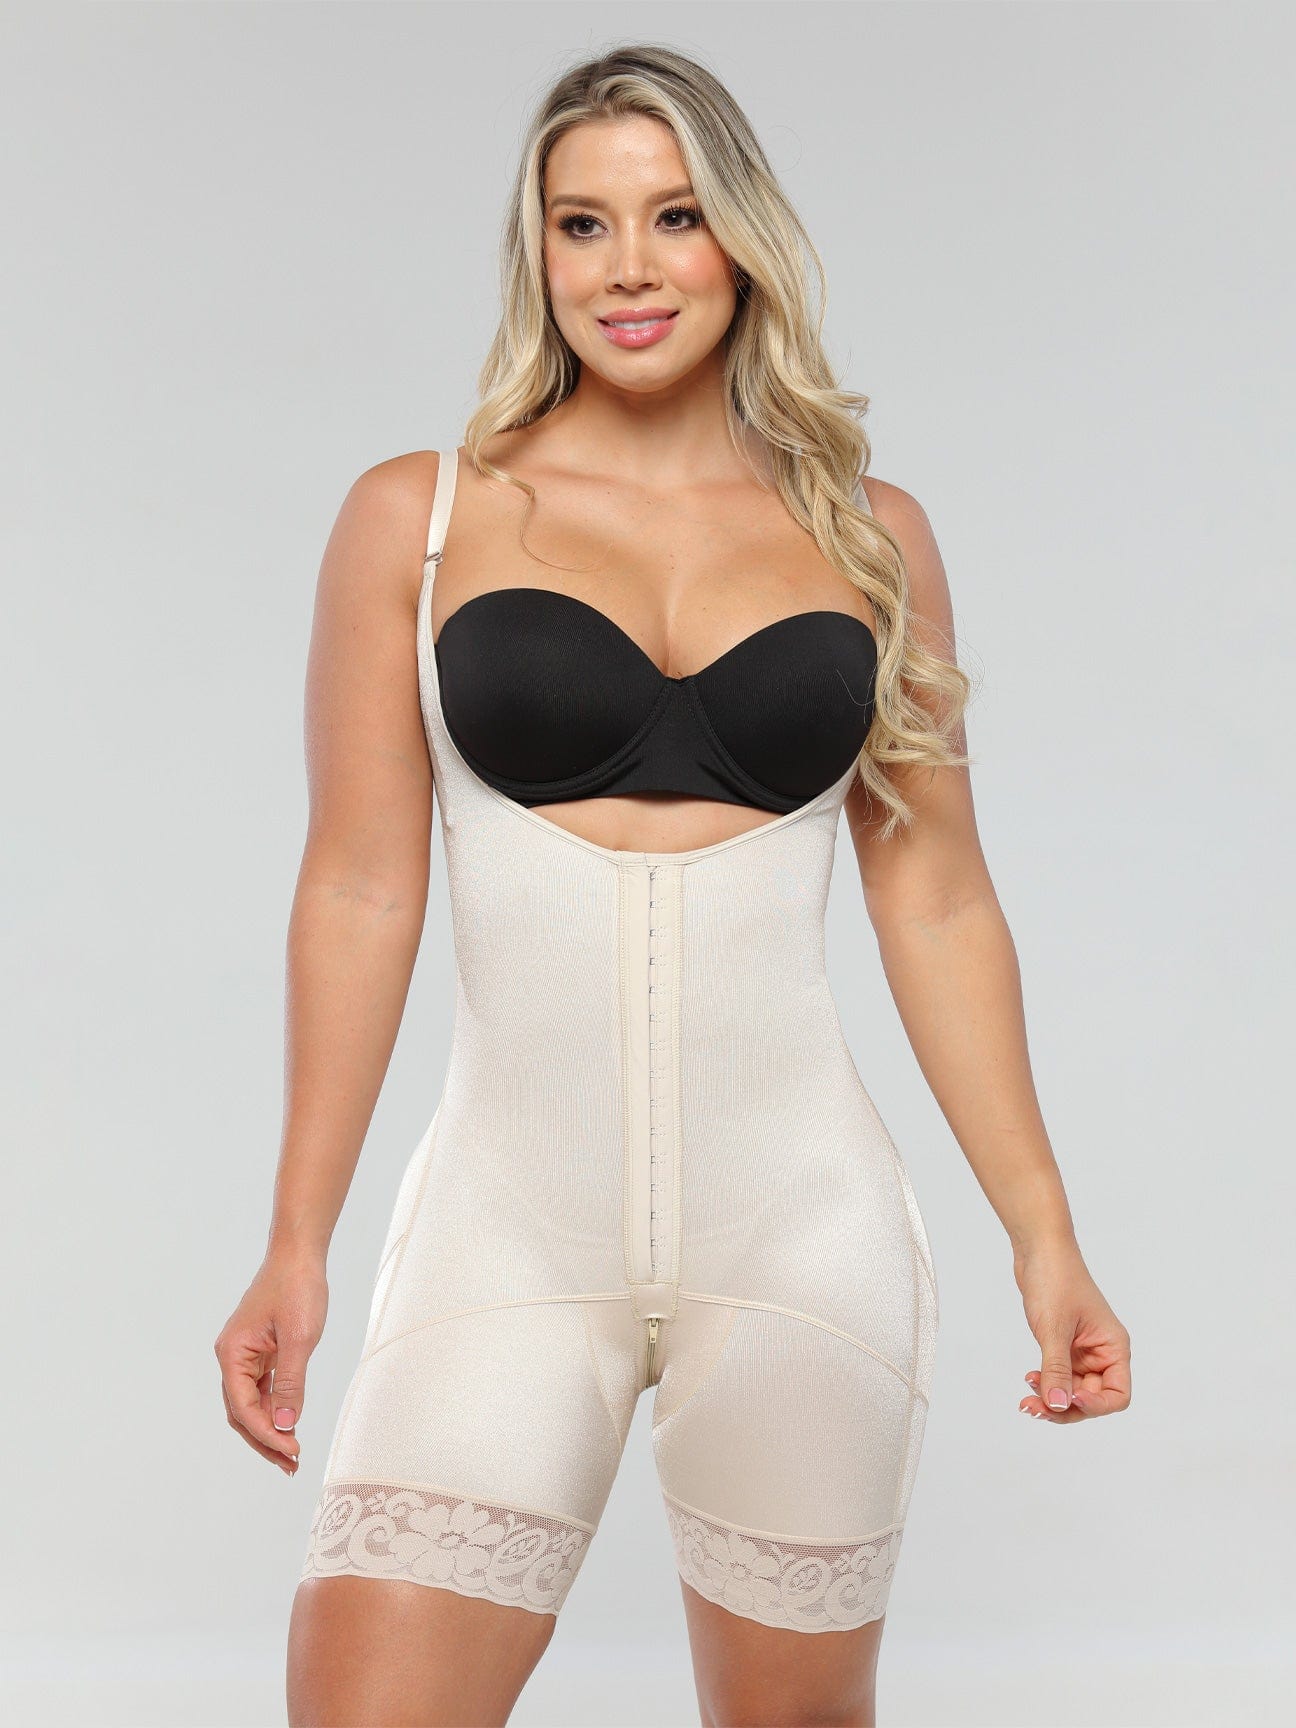 Compression Modeling Womens Shapewear With Thin Straps, Hook Closure, And   Faja Waist Trainer For Slimming And Postpartum Wear From Biancanne,  $31.54